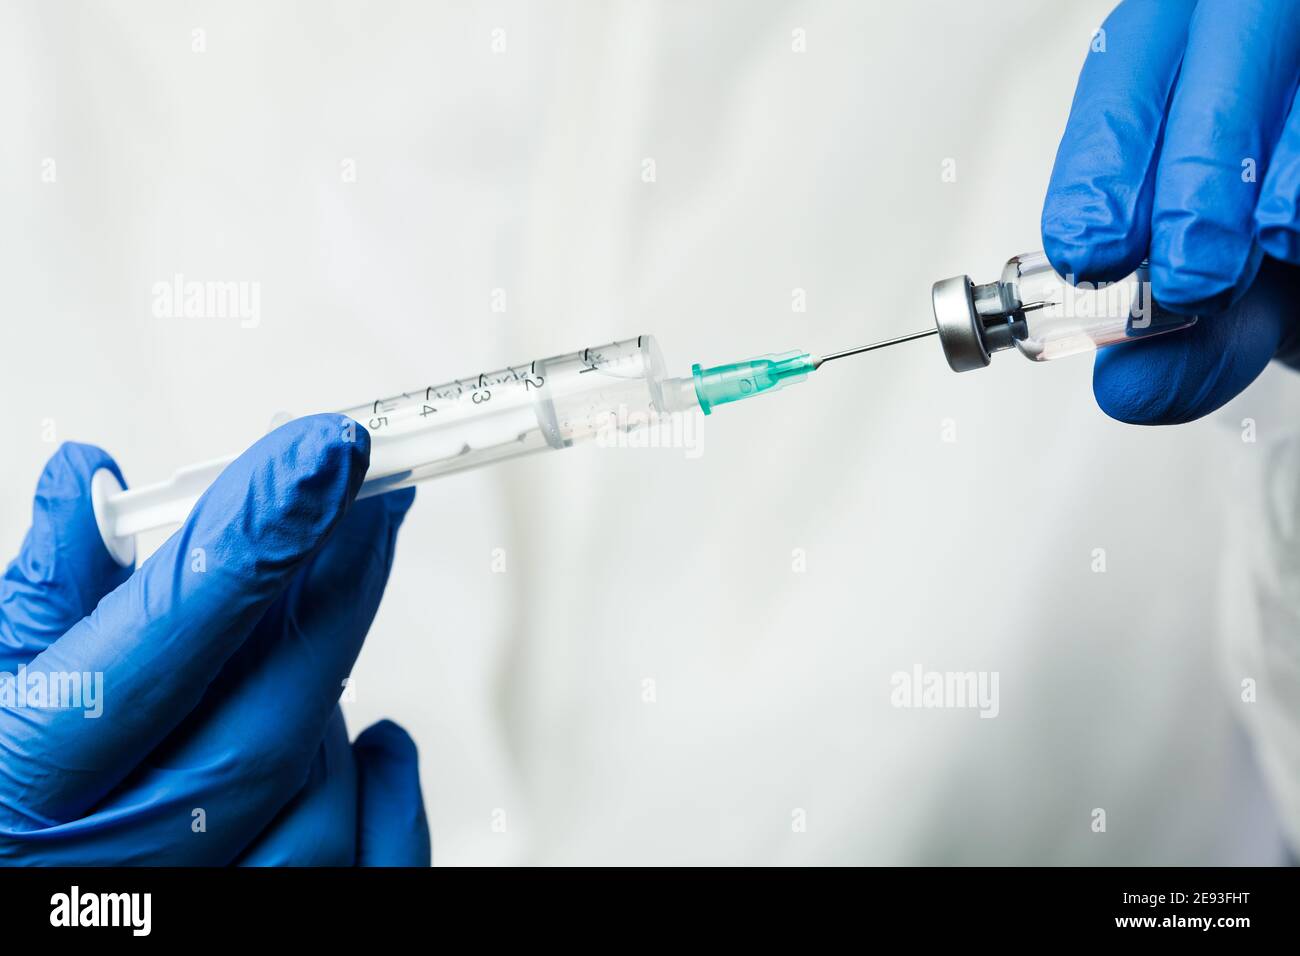 Nurse of NHS medical lab technician inserting syringe needle into glass vial bottle,COVID-19 medicament injection shot,virus disease infection remedy, Stock Photo